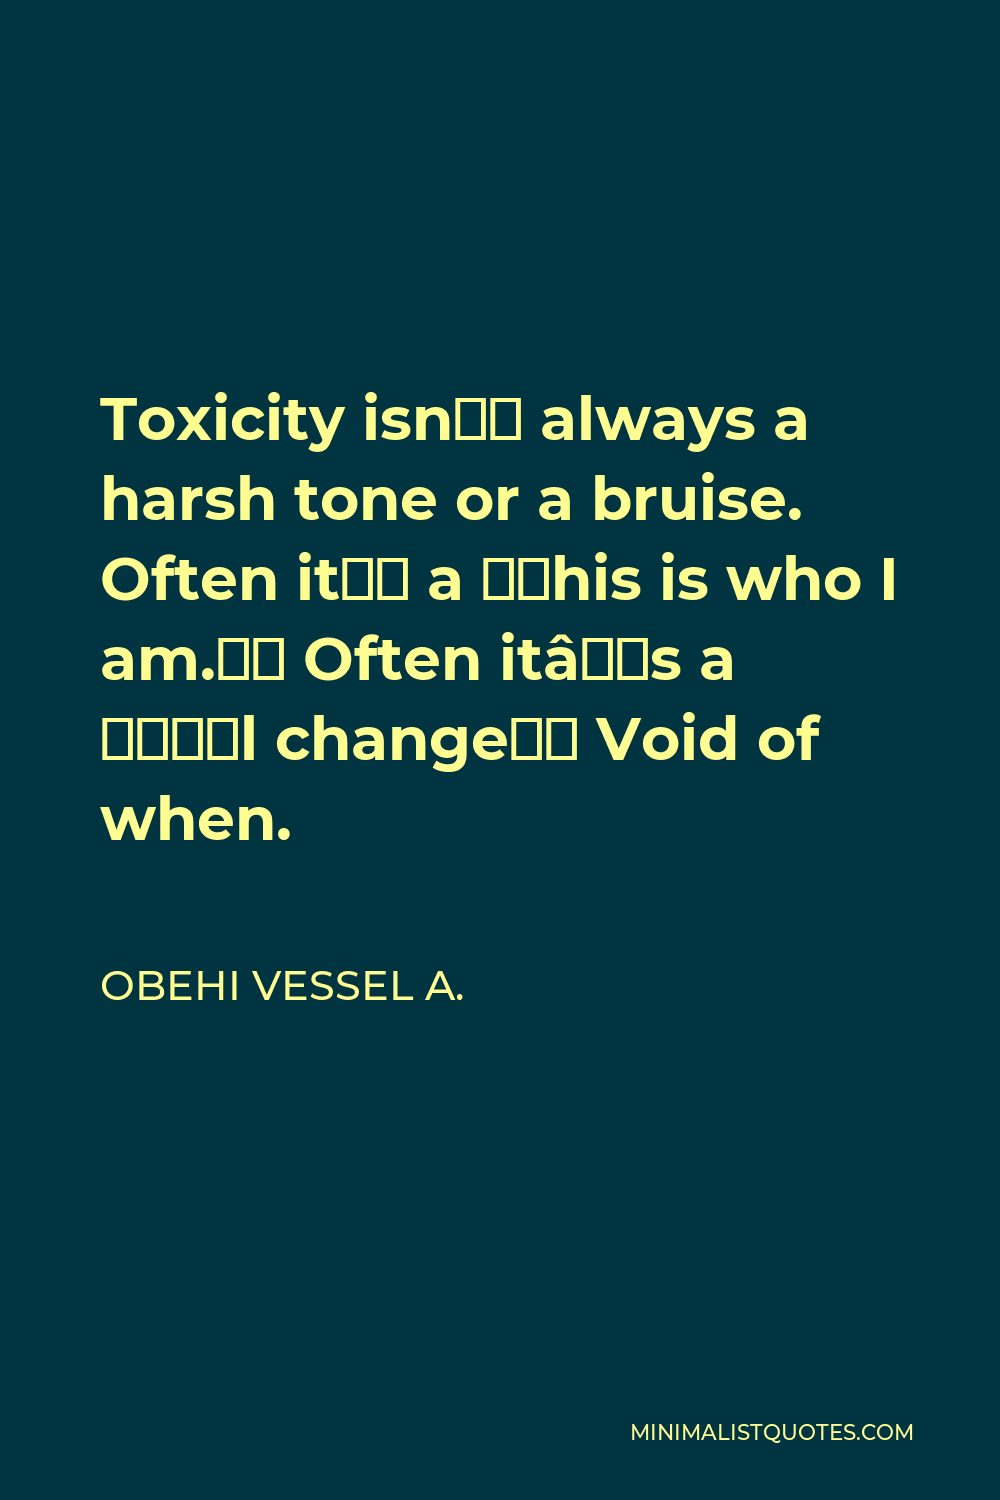 Obehi Vessel A. Quote - Toxicity isn’t always a harsh tone or a bruise. Often it’s a “this is who I am.” Often it’s a “I’ll change” Void of when.